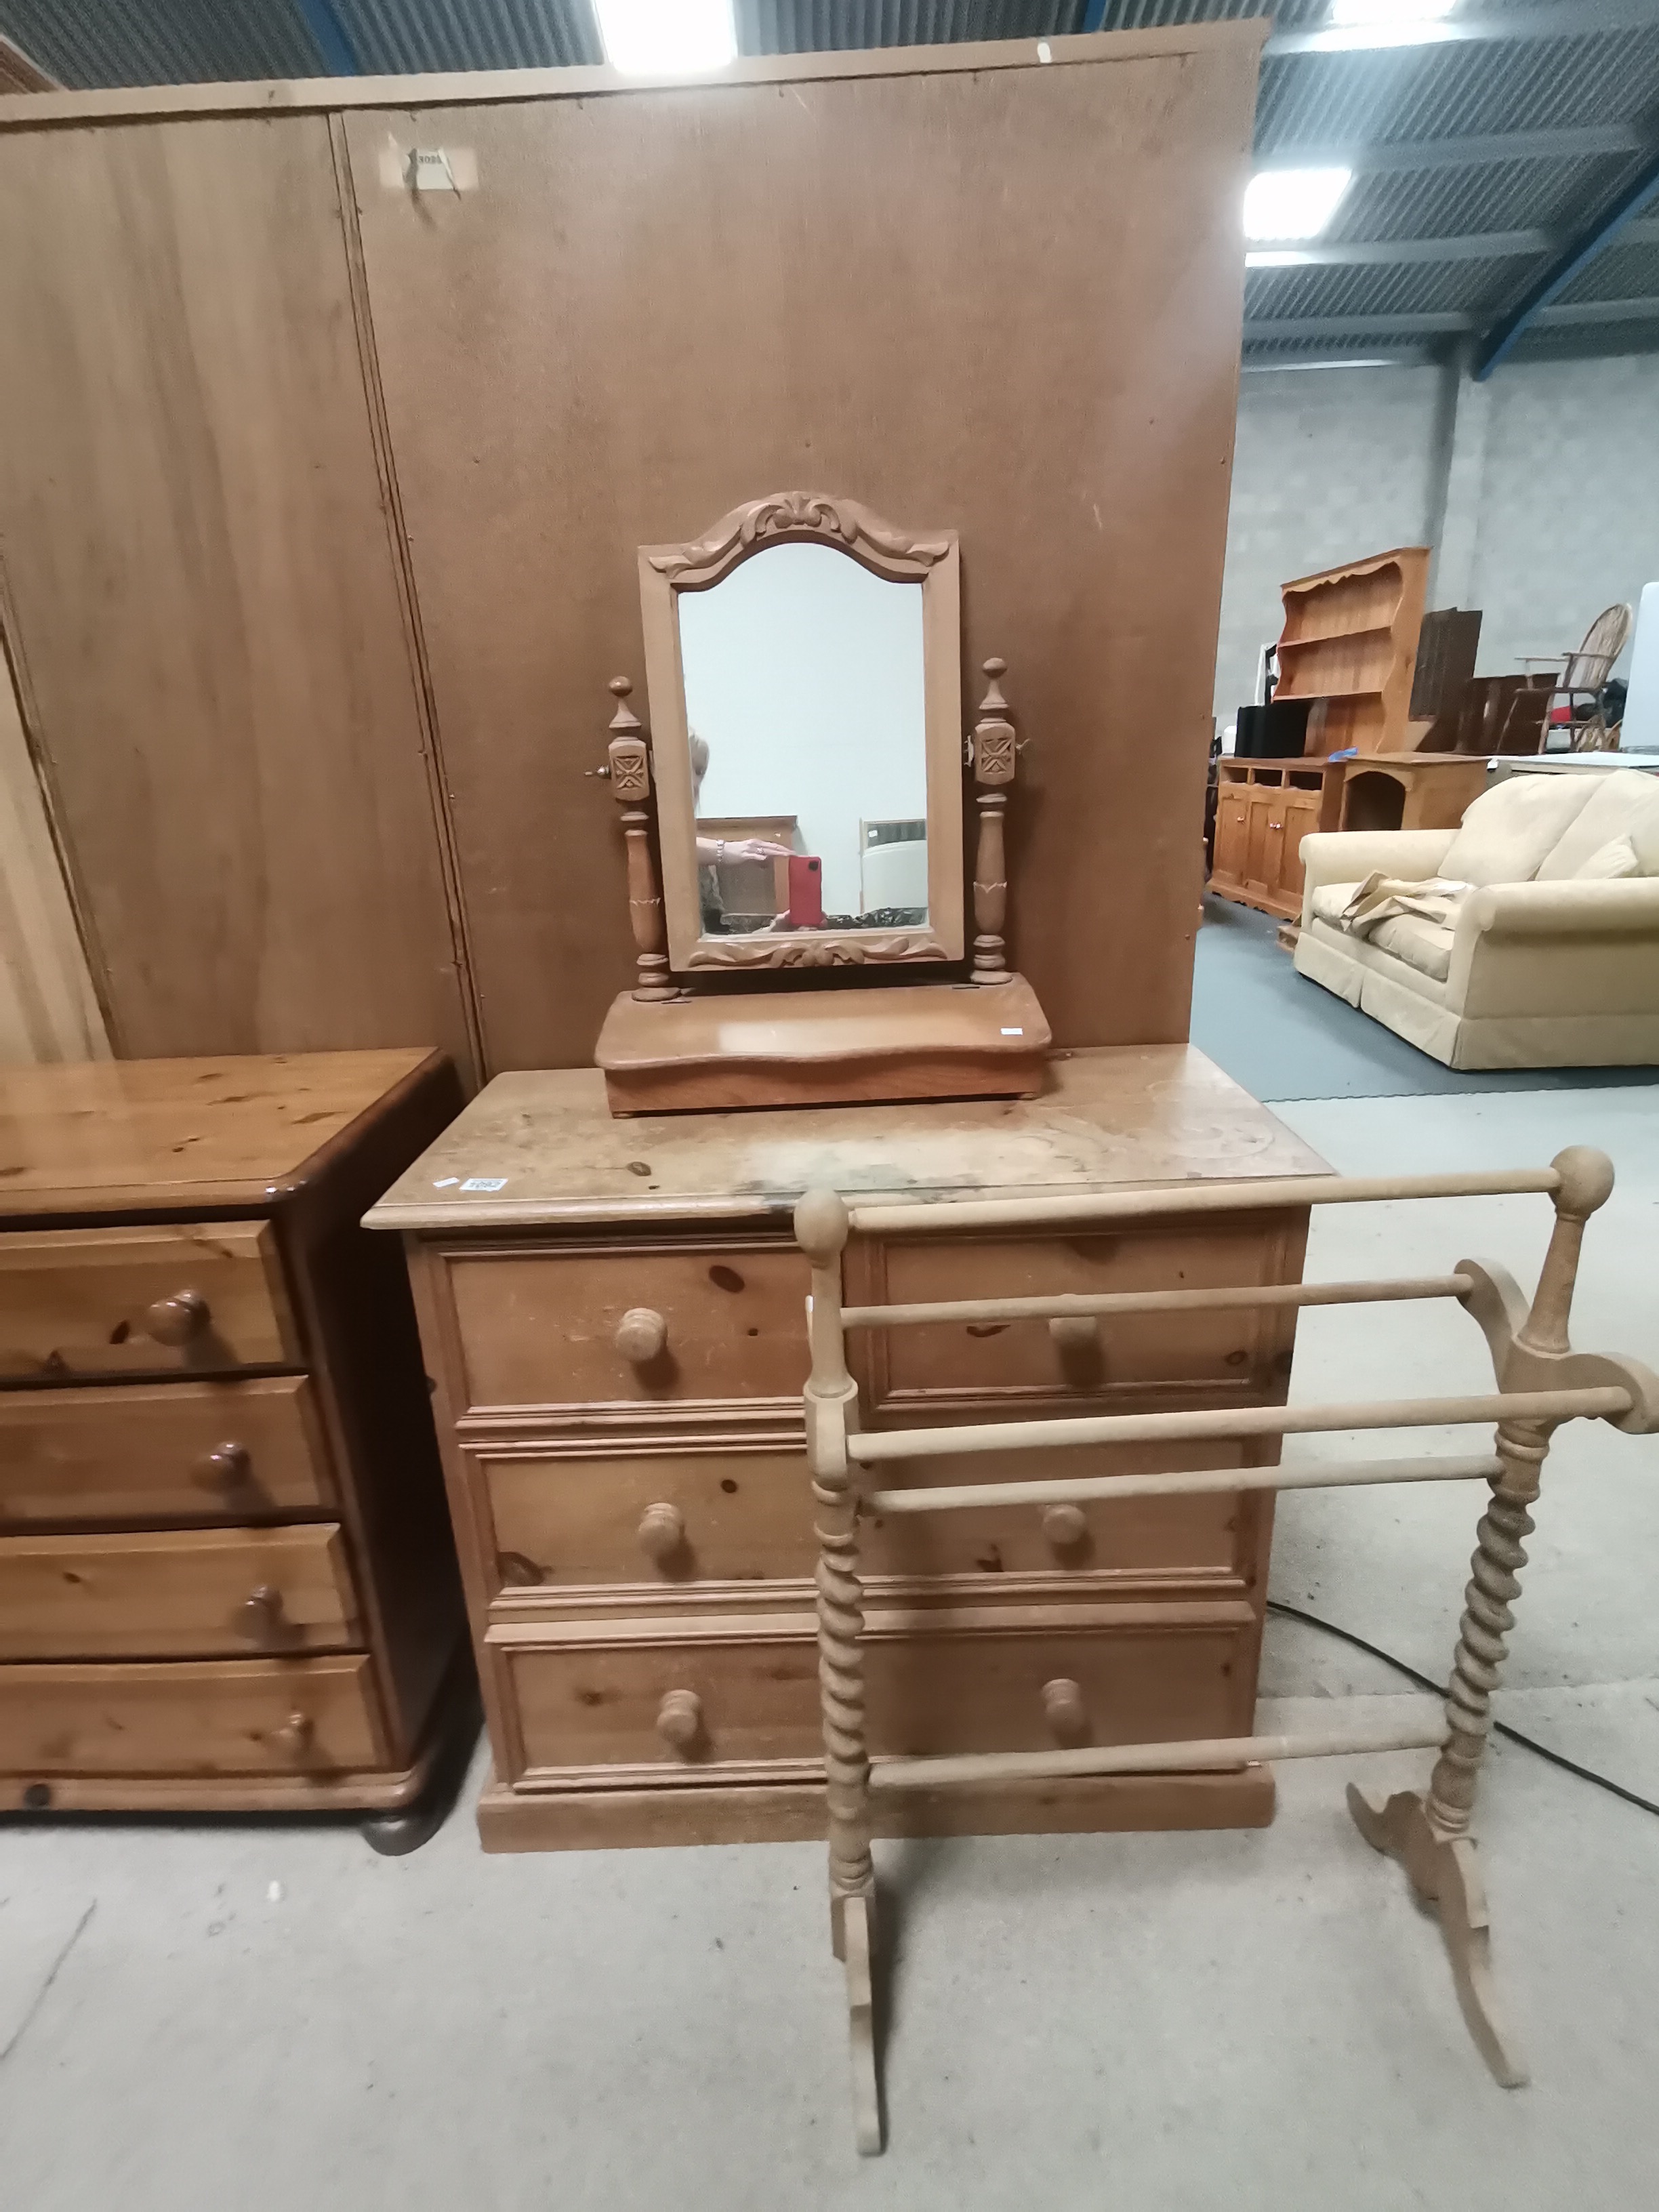 Antique pine 3ht chest of drawers W91 with separate swing mirror and towel rail